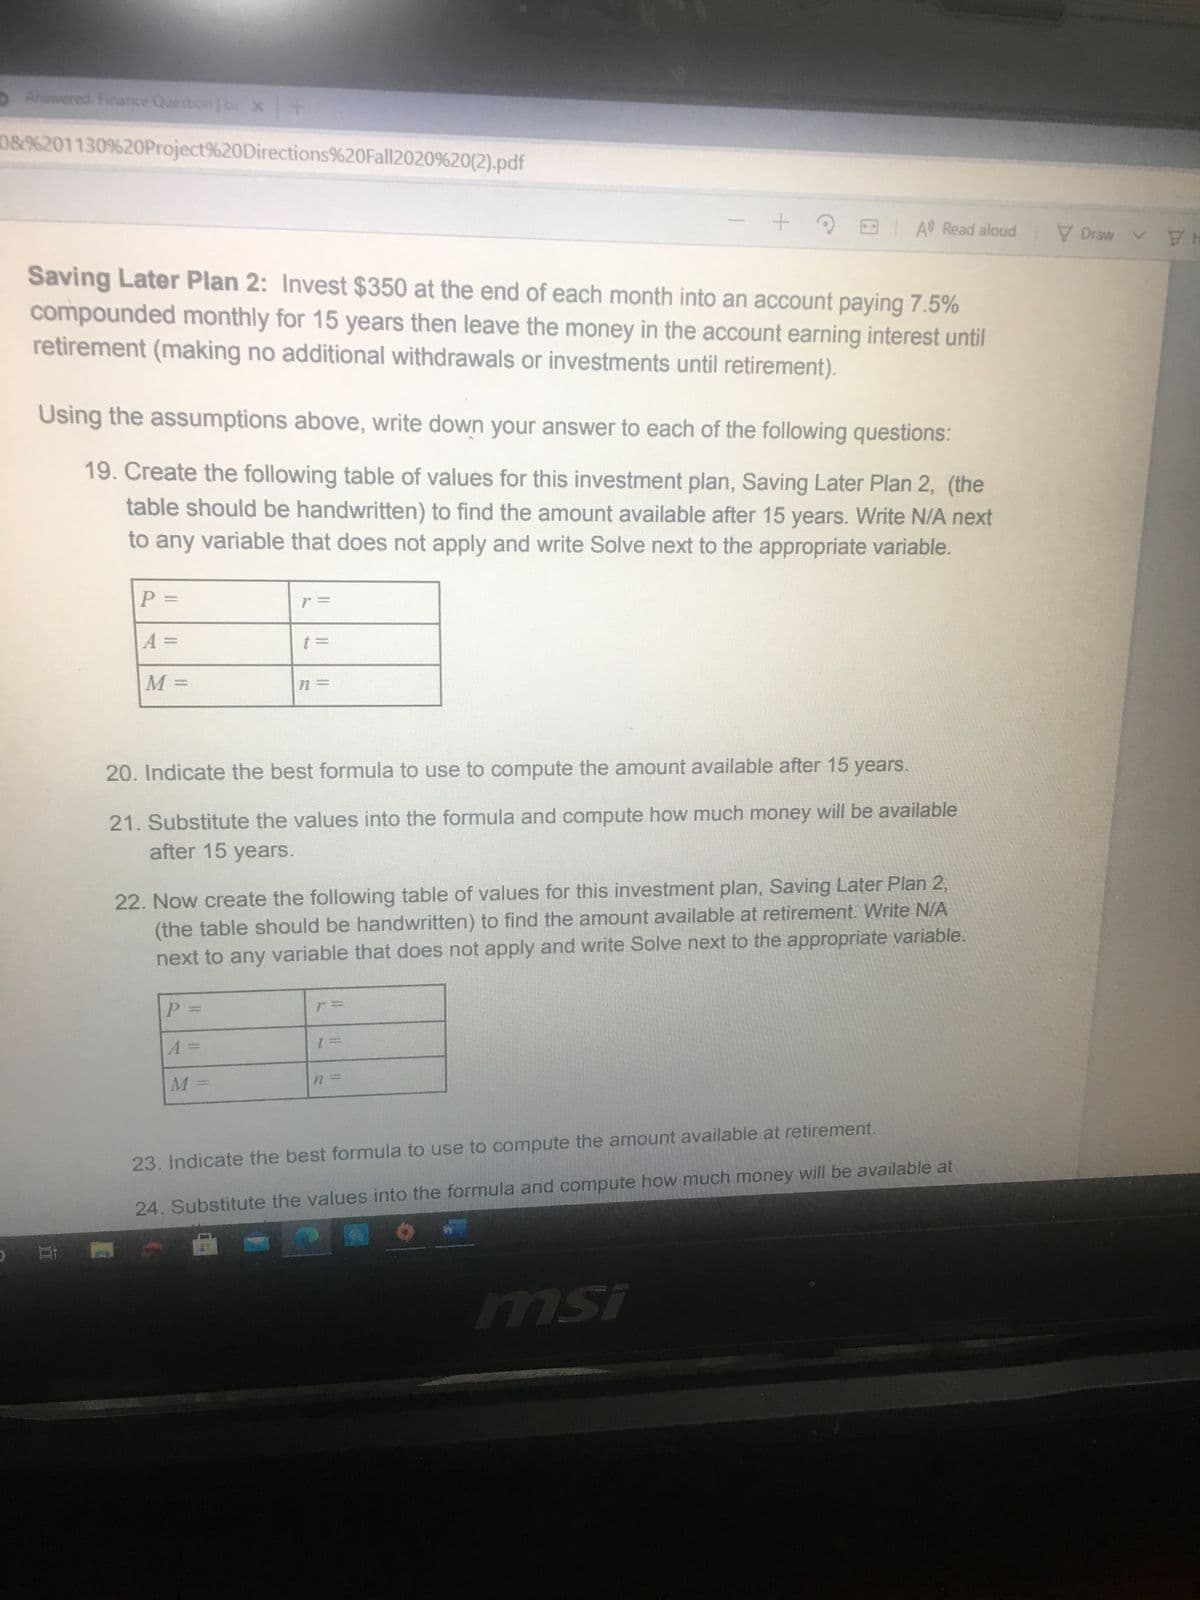 5Answered Finance Question b x+
08%201130%20Project%20Directions%20Fall2020%20(2).pdf
E A Read aloud
V Drawv
HA
Saving Later Plan 2: Invest $350 at the end of each month into an account paying 7.5%
compounded monthly for 15 years then leave the money in the account earning interest until
retirement (making no additional withdrawals or investments until retirement).
Using the assumptions above, write down your answer to each of the following questions:
19. Create the following table of values for this investment plan, Saving Later Plan 2, (the
table should be handwritten) to find the amount available after 15 years. Write N/A next
to any variable that does not apply and write Solve next to the appropriate variable.
20. Indicate the best formula to use to compute the amount available after 15 years.
21. Substitute the values into the formula and compute how much money will be available
after 15 years.
22. Now create the following table of values for this investment plan, Saving Later Plan 2,
(the table should be handwritten) to find the amount available at retirement. Write N/A
next to any variable that does not apply and write Solve next to the appropriate variable.
P.
%3D
23. Indicate the best formula to use to compute the amount available at retirement.
24. Substitute the values into the formula and compute how much money will be available at
ISu
